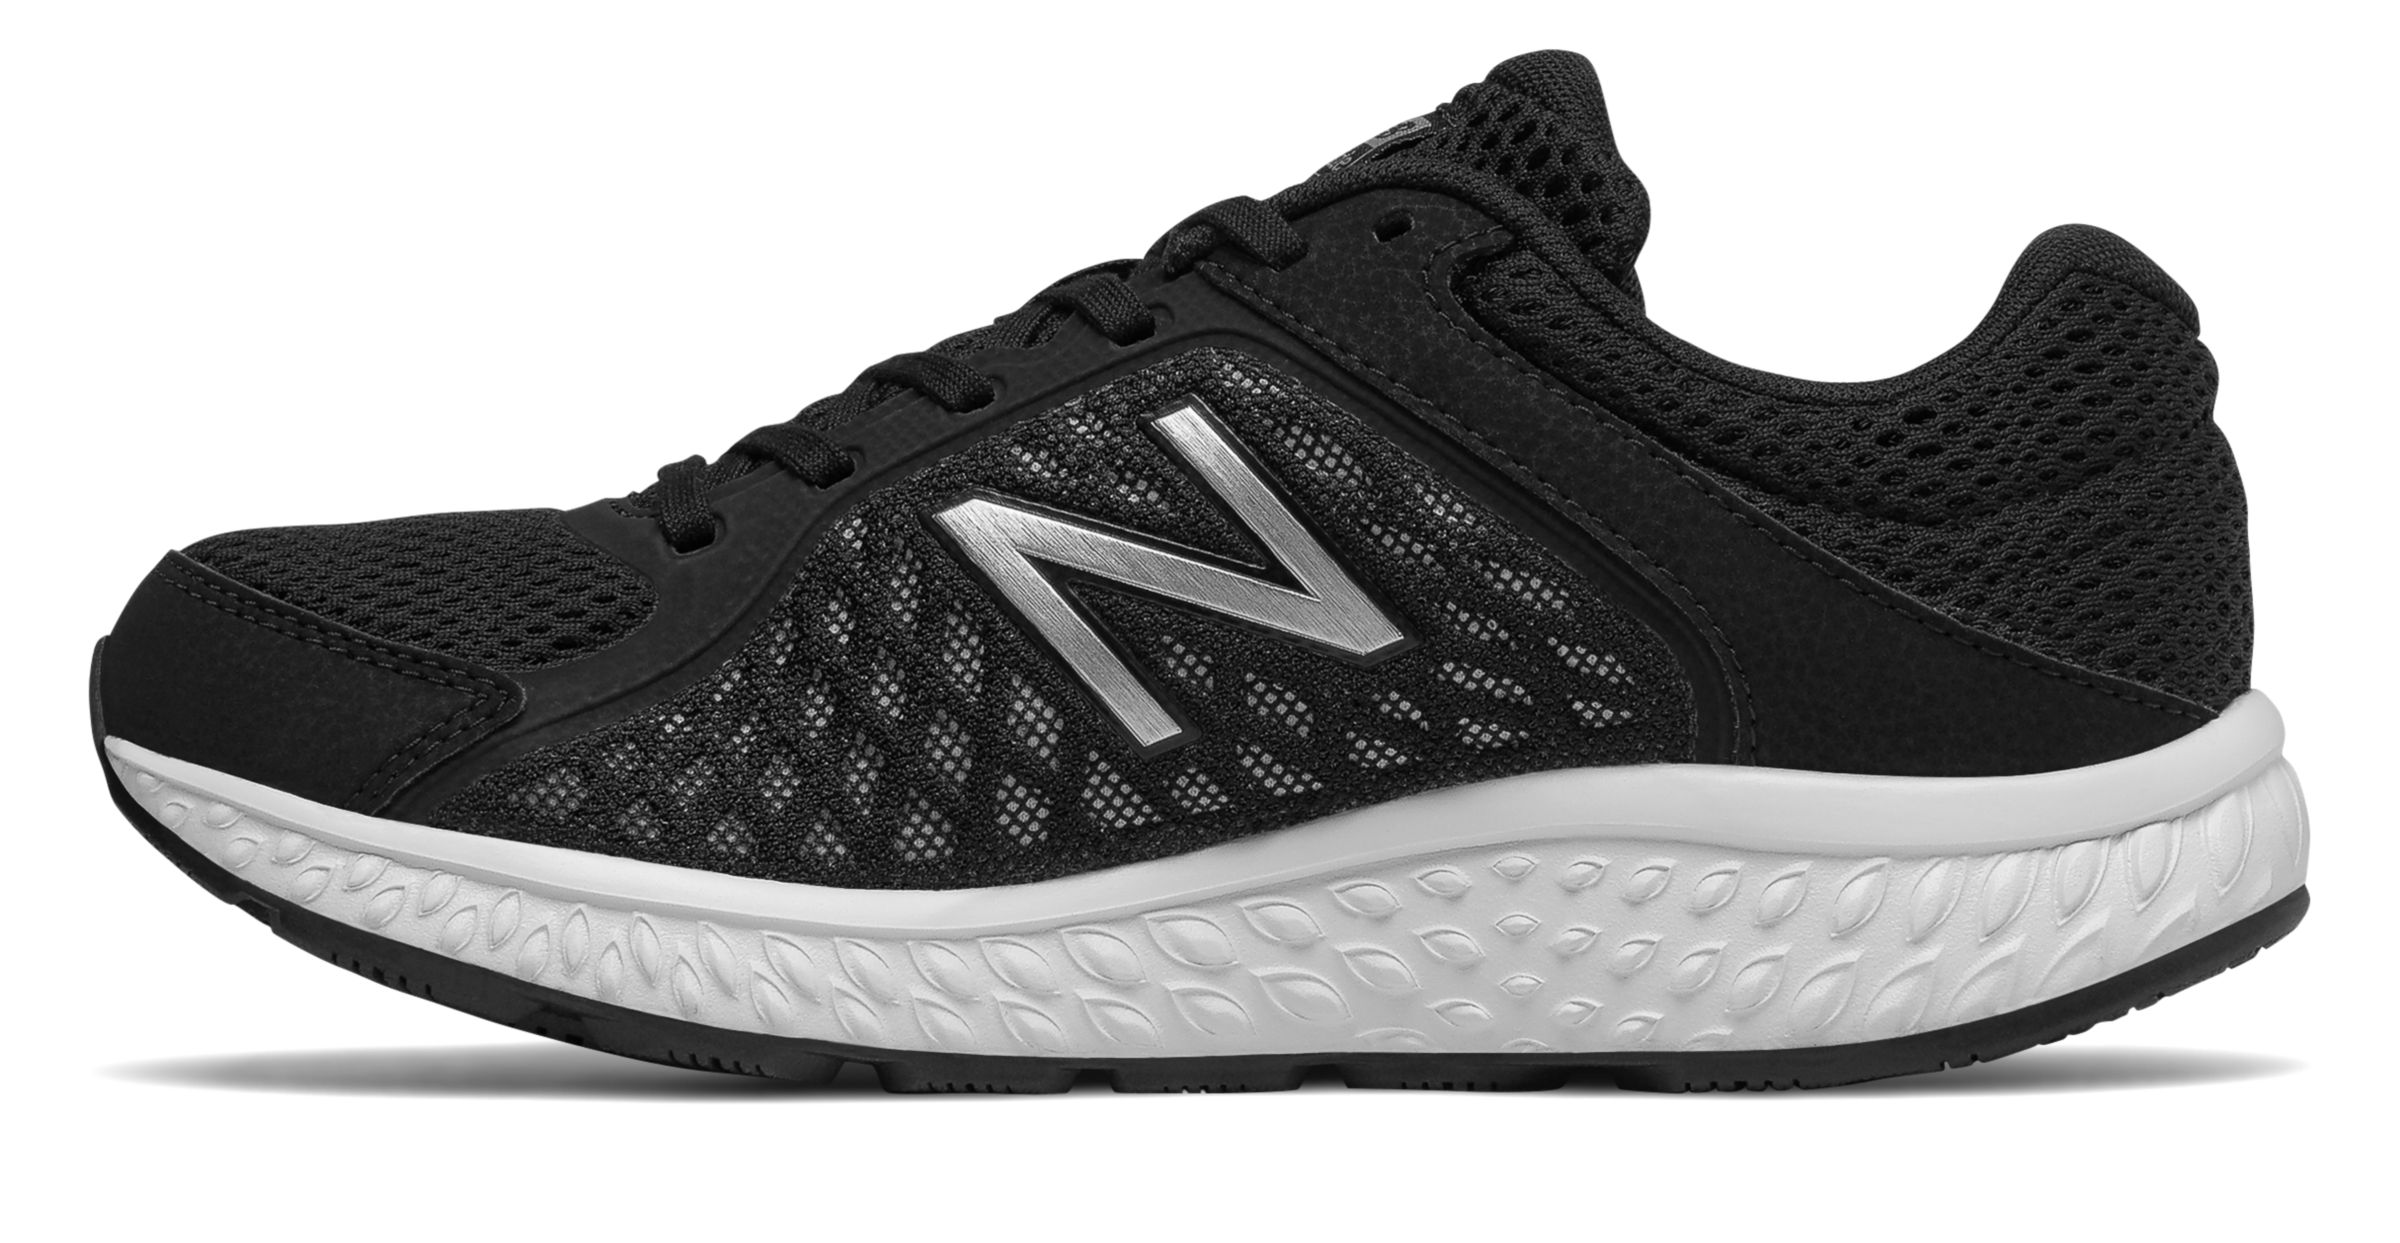 New Balance W420-V4 on Sale - Discounts Up to 61% Off on W420LB4 at Joe's New  Balance Outlet